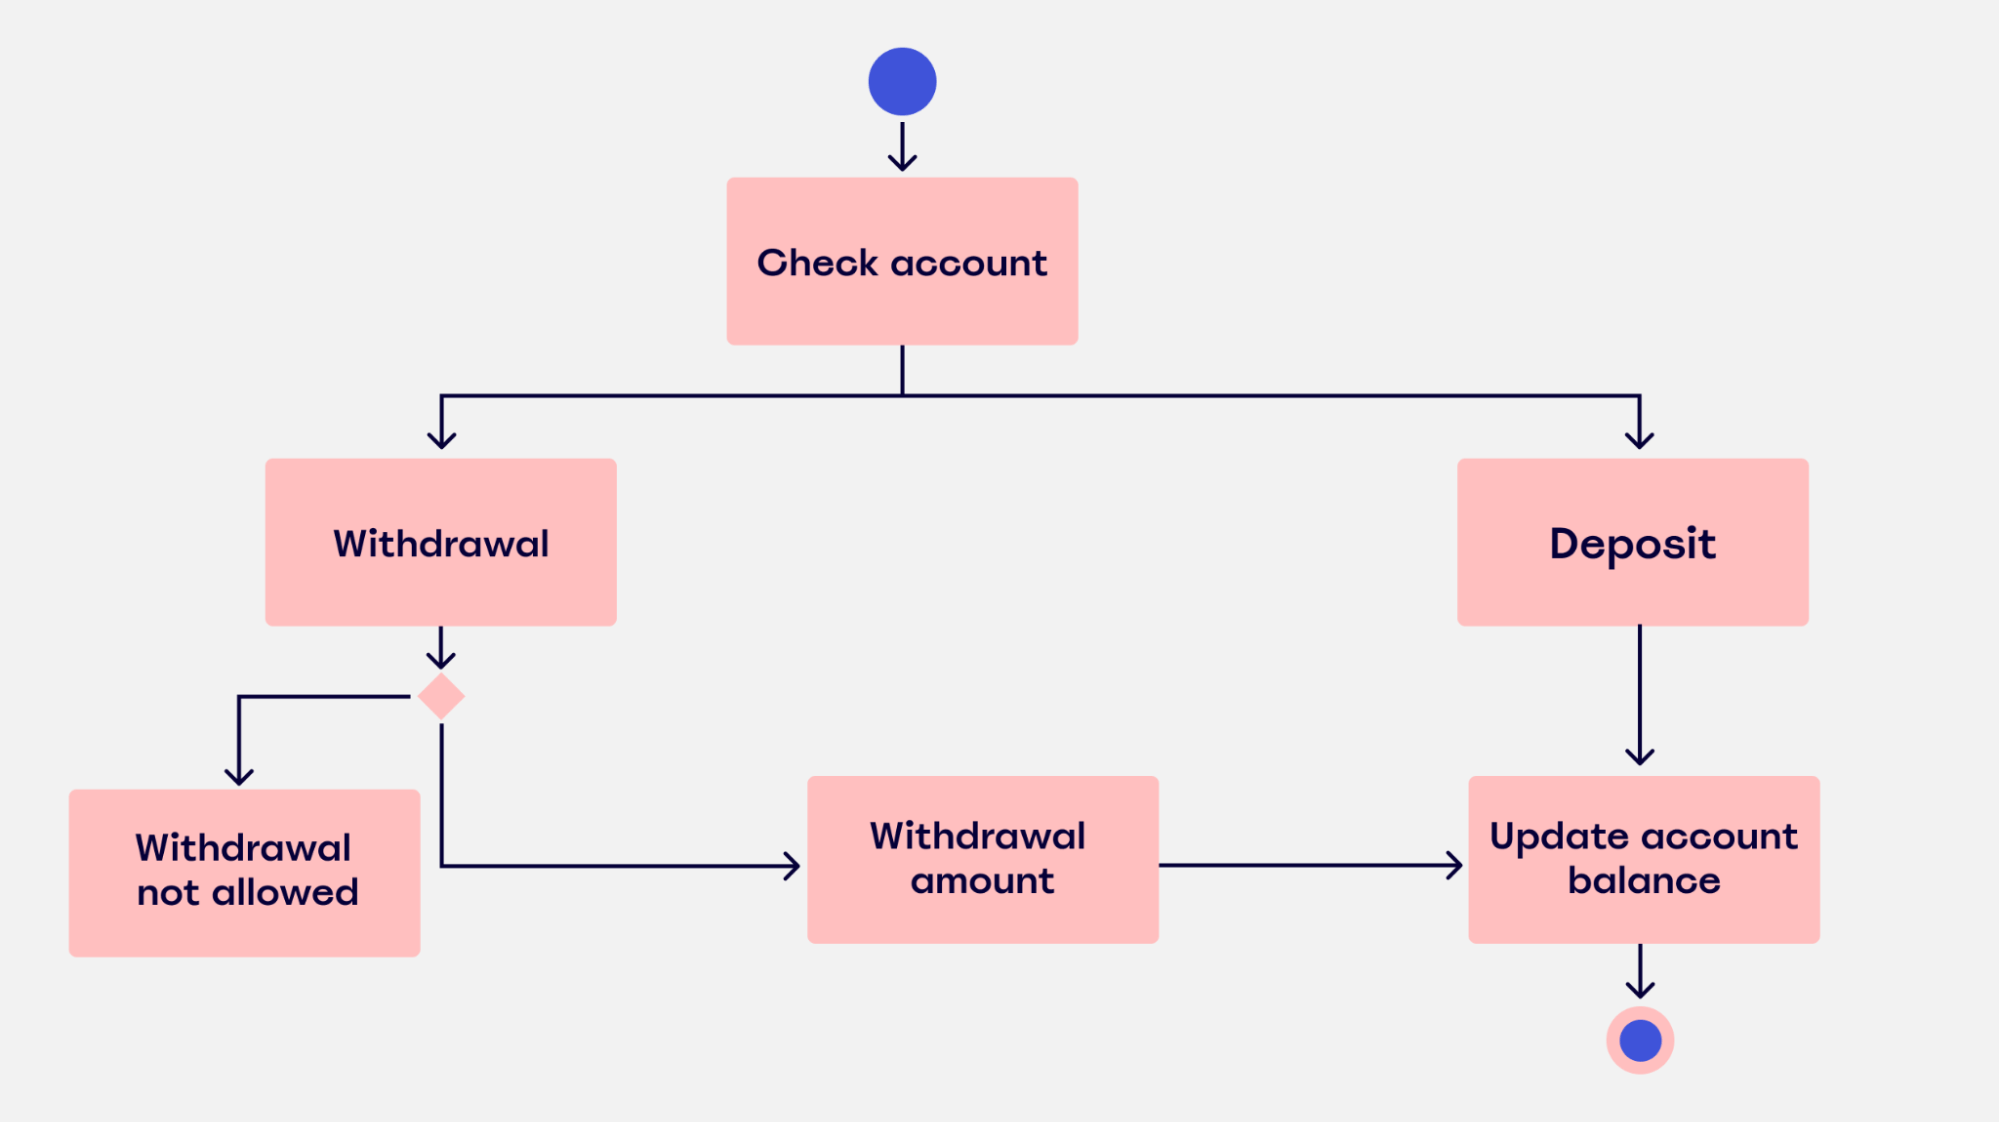 An image of an activity diagram for banking